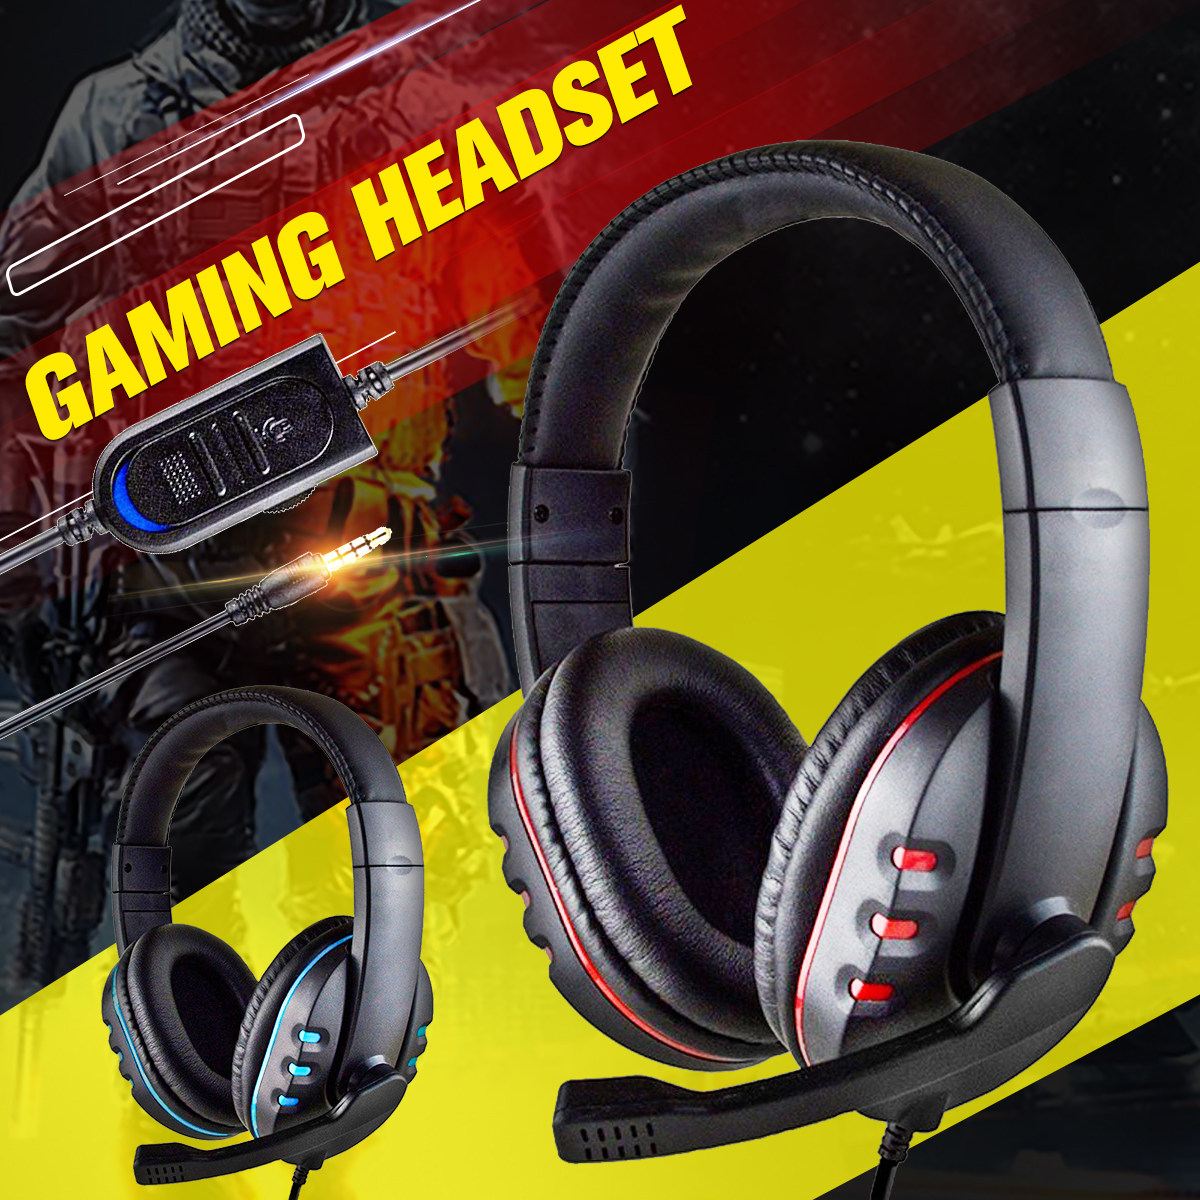 Portable-Gaming-Headset-35mm-Stereo-Surround-Gamer-Wired-Headphone-With-Mic-for-PC-Computer-PS4-Xbox-1699413-1